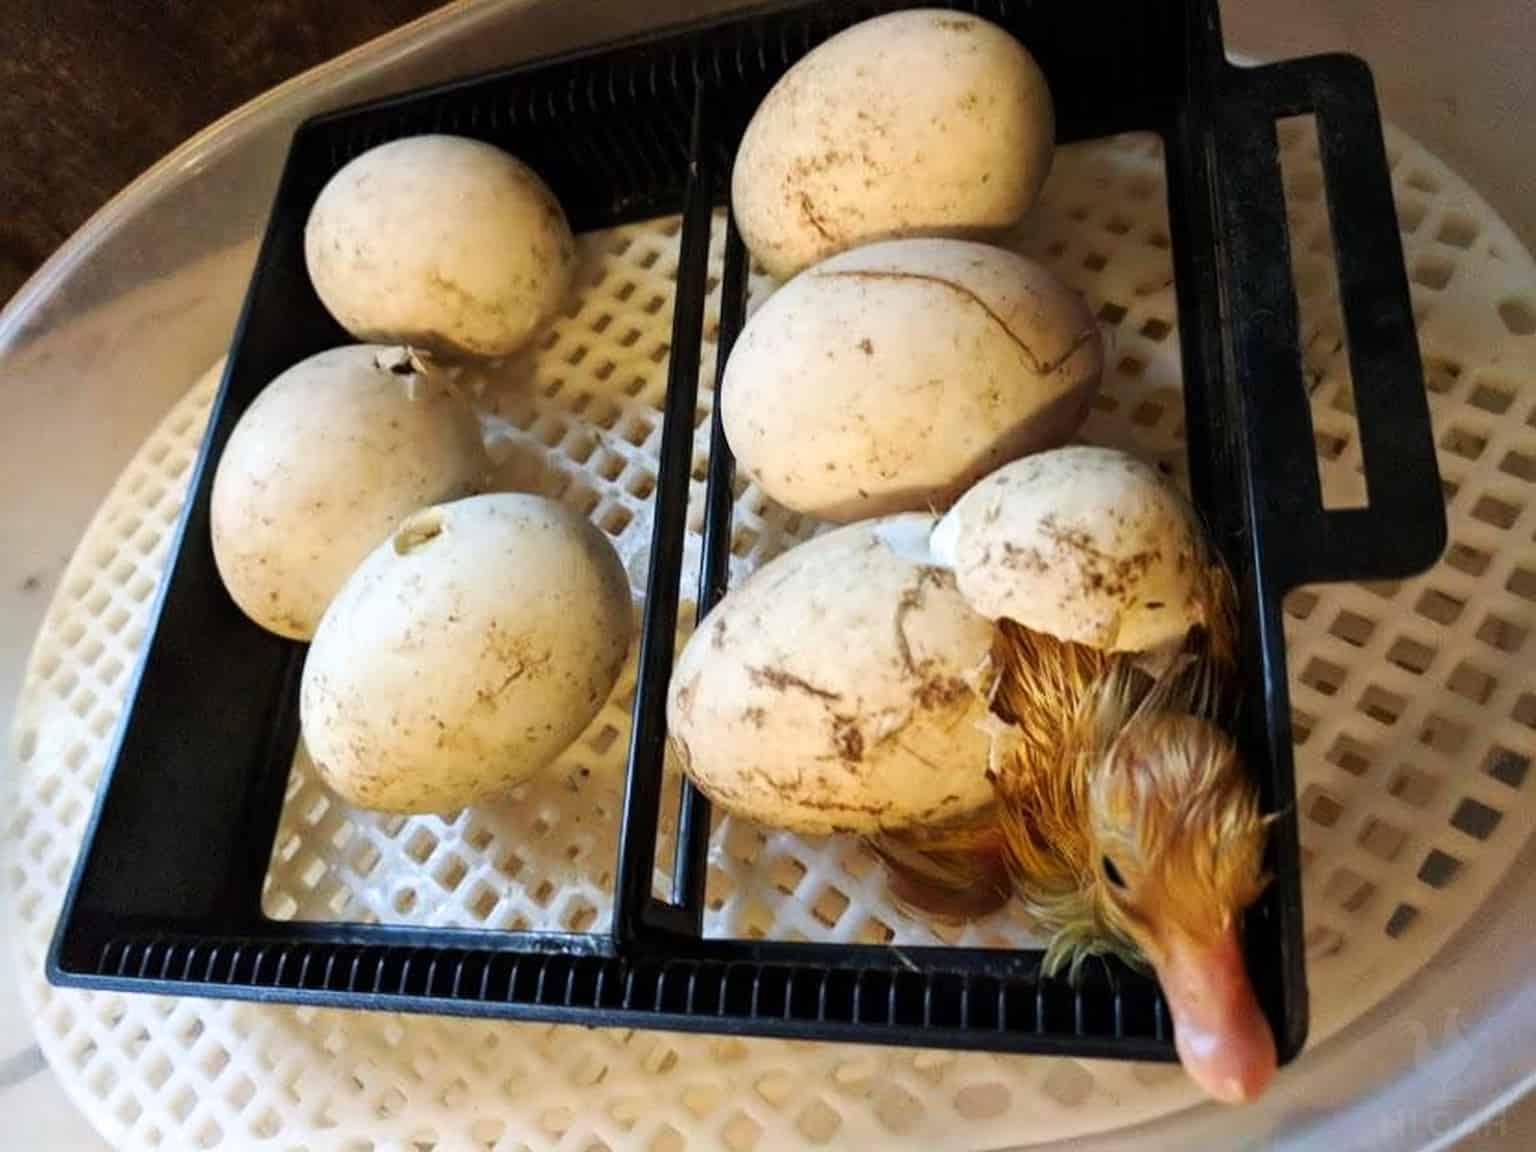 baby duckling hatching from egg